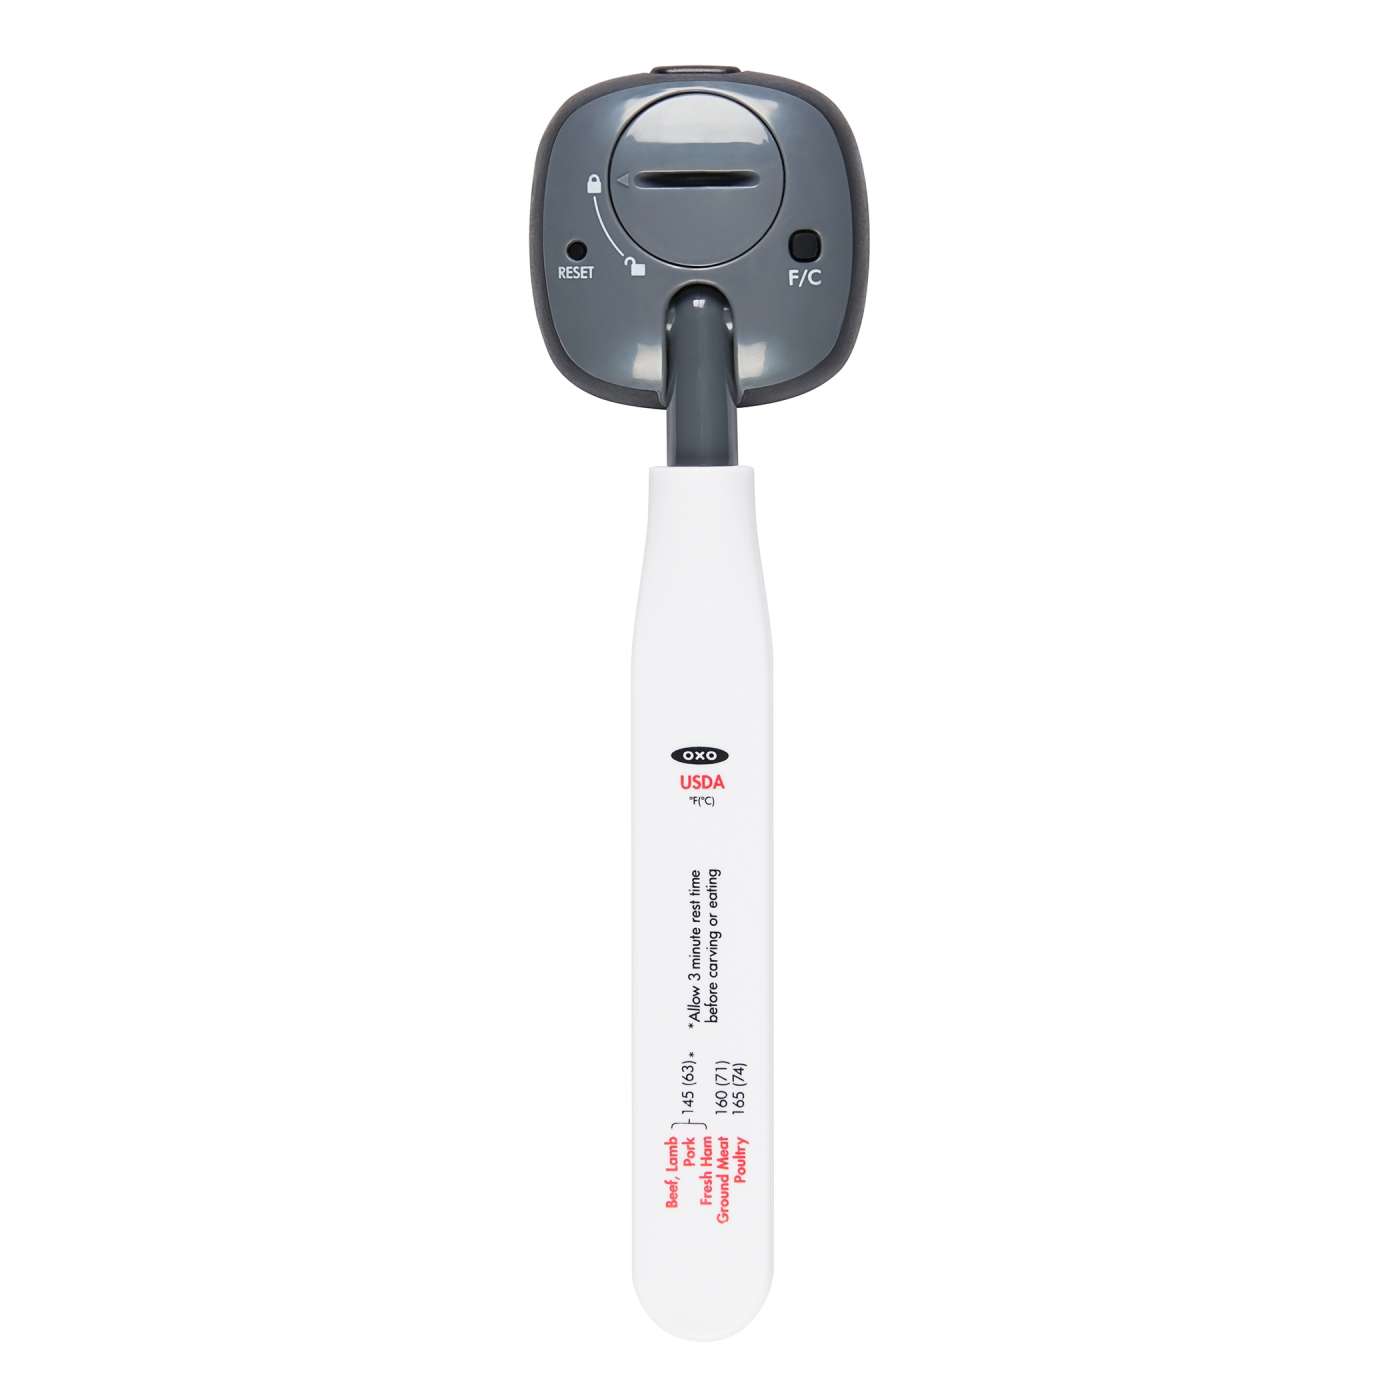 Oxo Good Grips Precision Digital Leave-in Thermometer